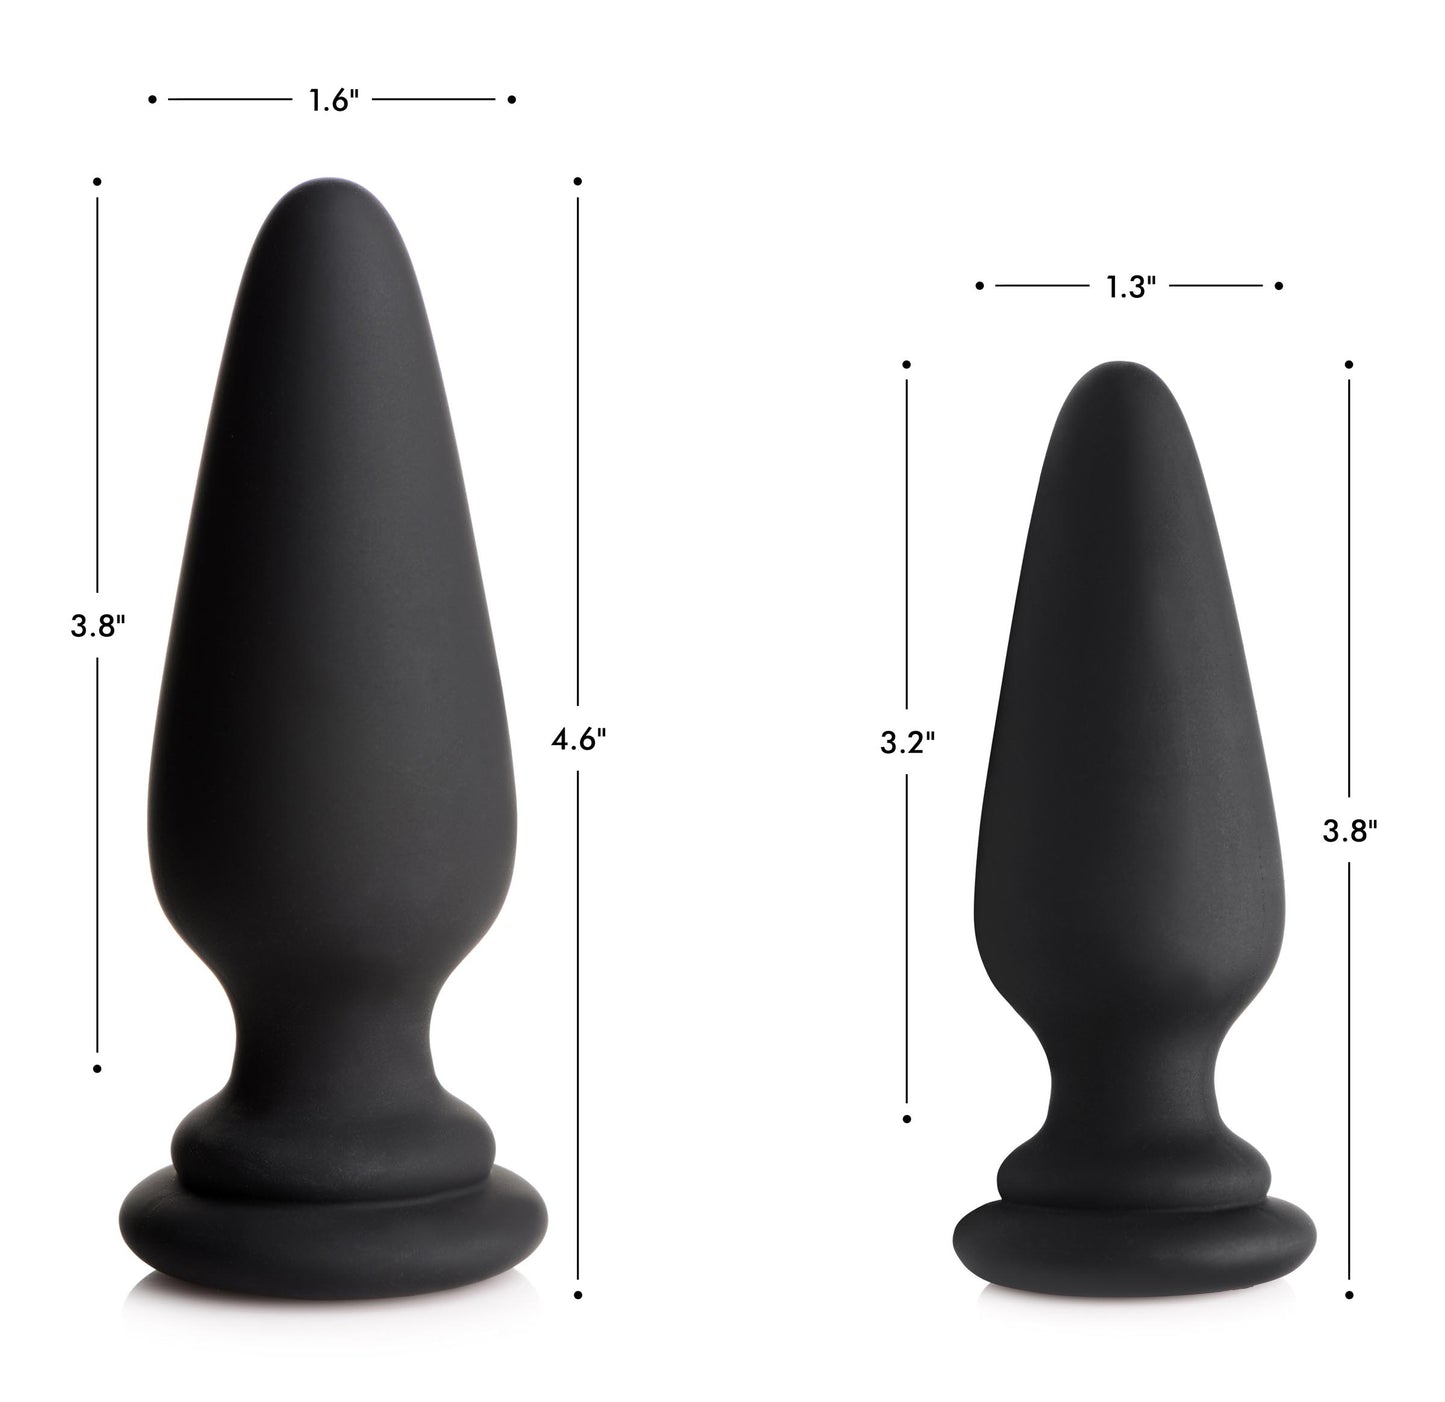 Small Anal Plug With Interchangeable Fox Tail - Black And White